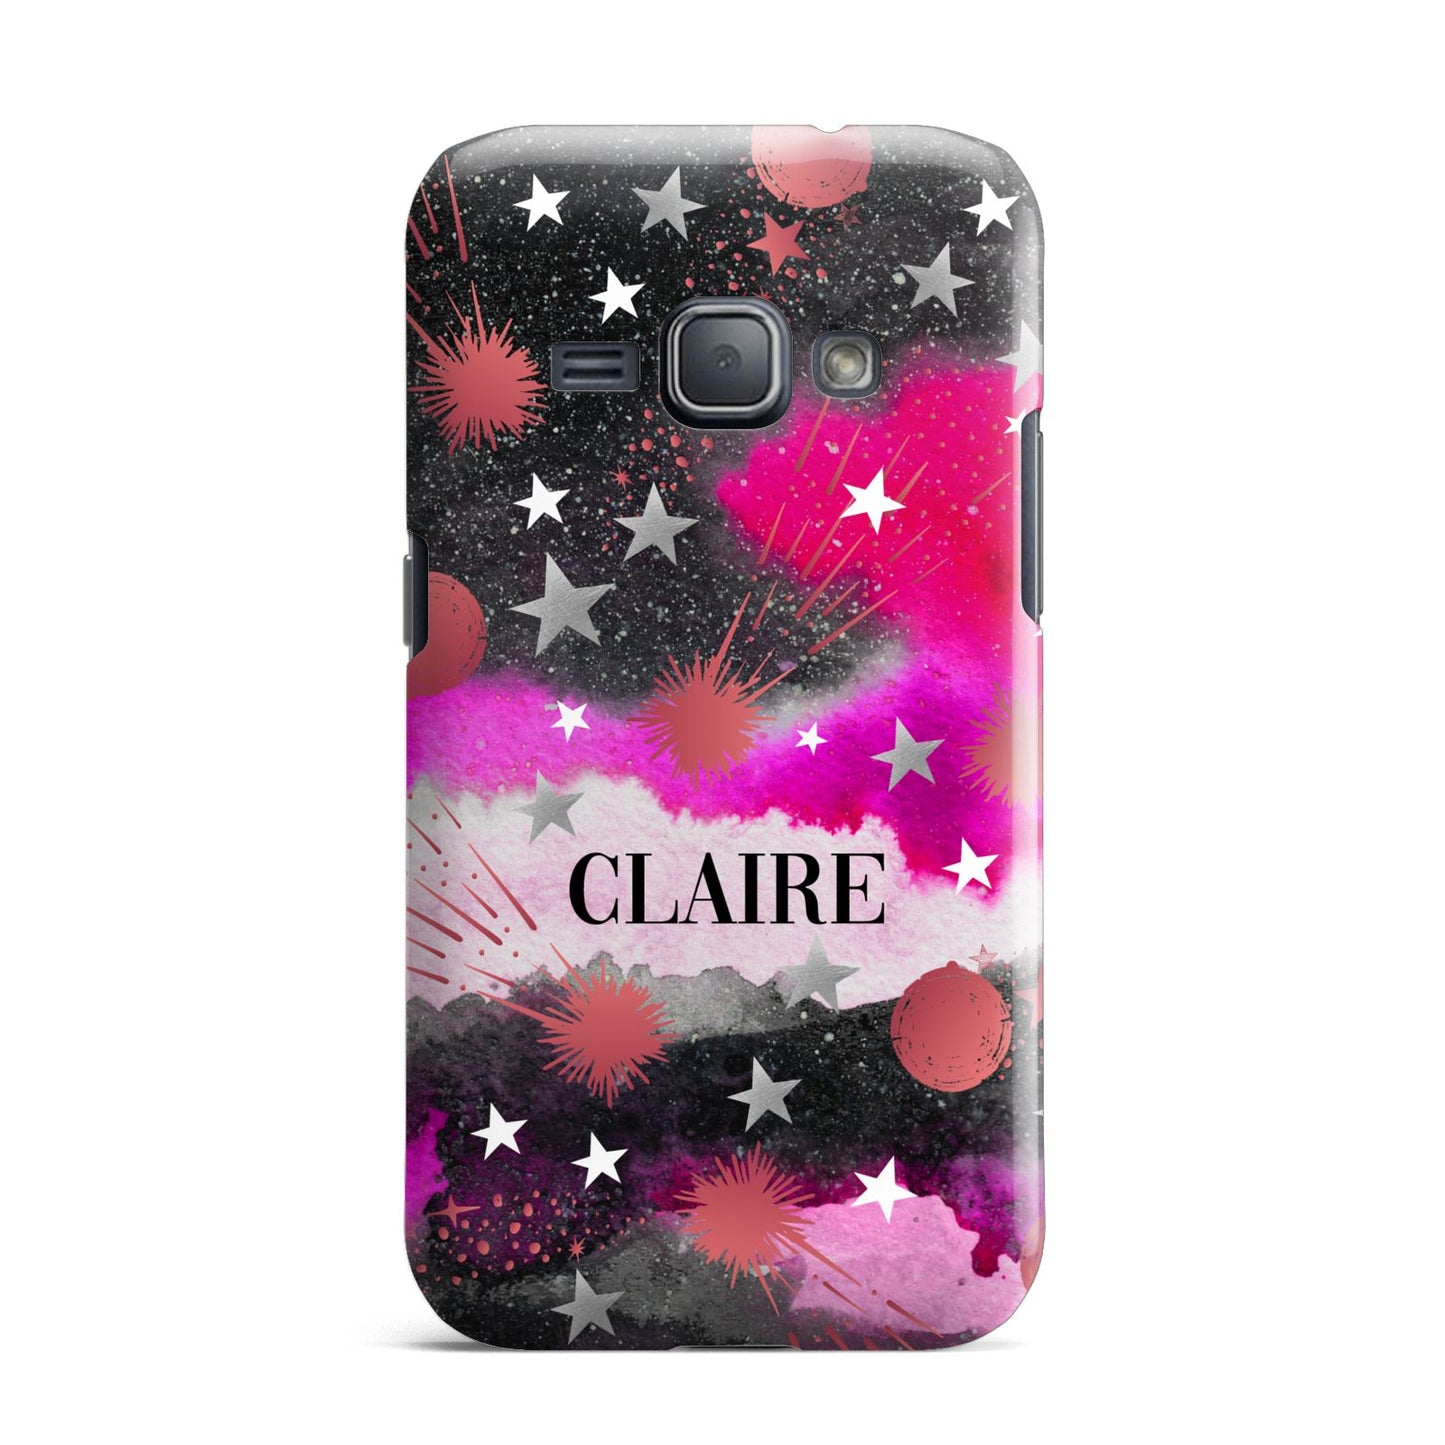 Personalised Pink Celestial Samsung Galaxy J1 2016 Case